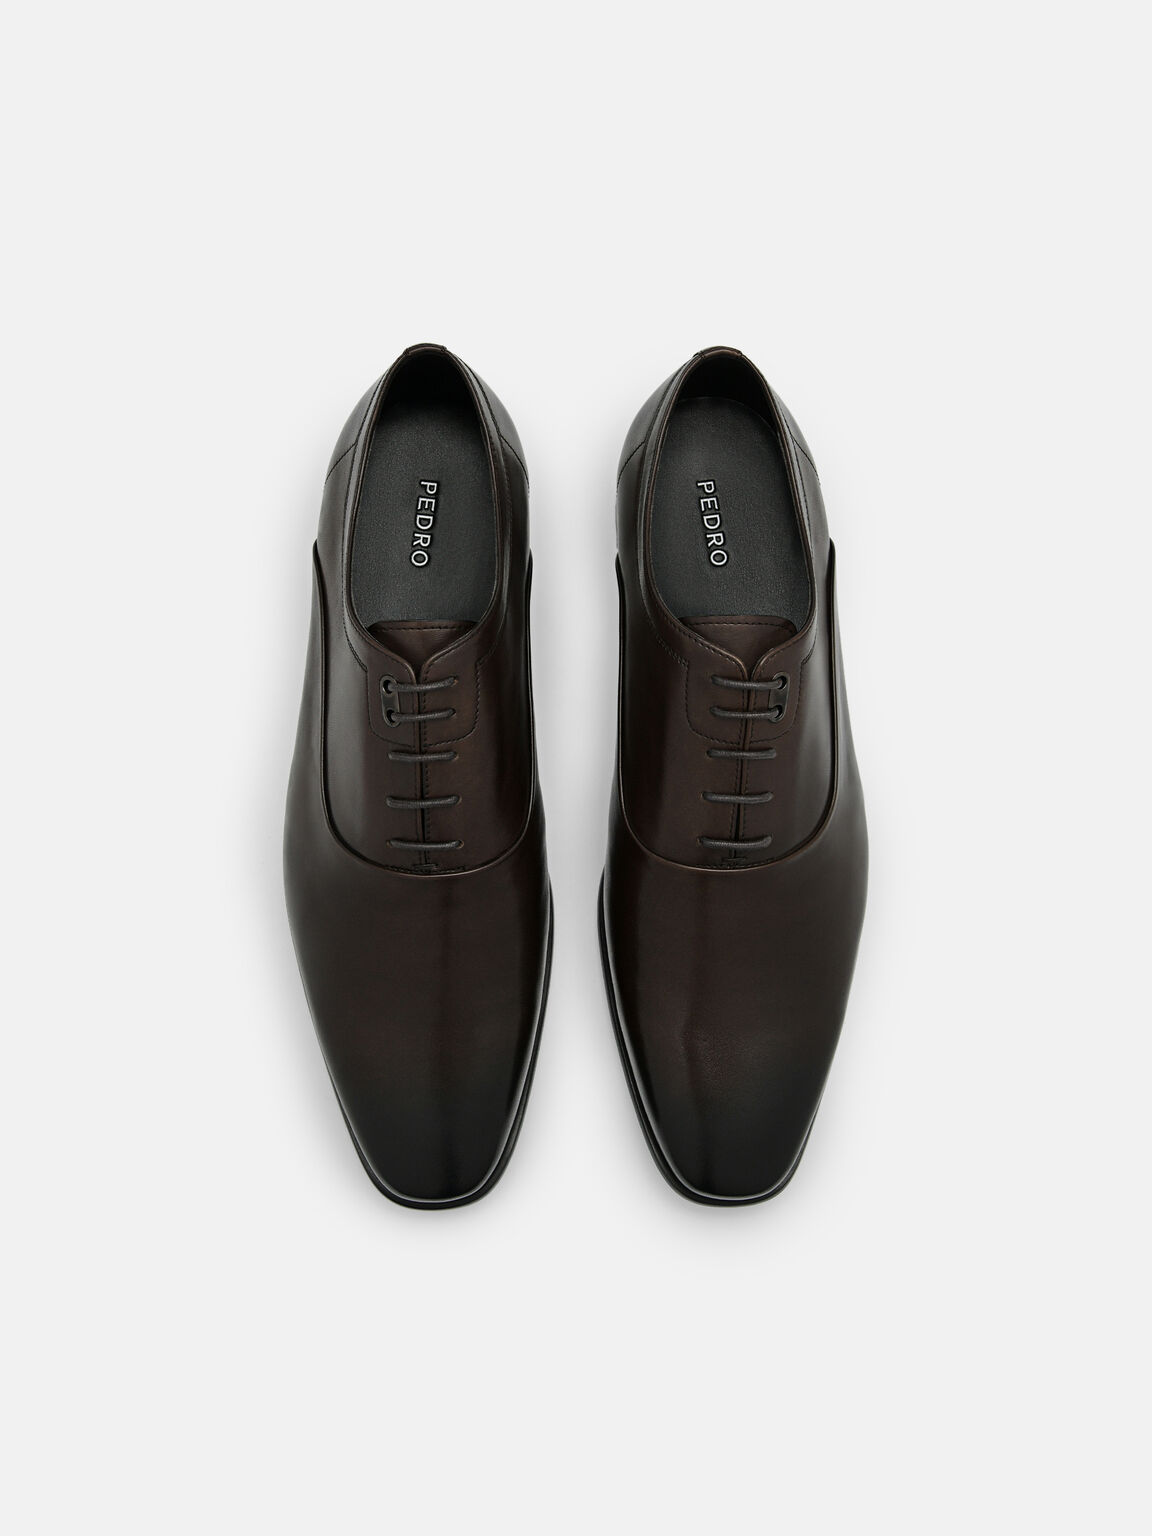 Leather Oxford Shoes, Dark Brown